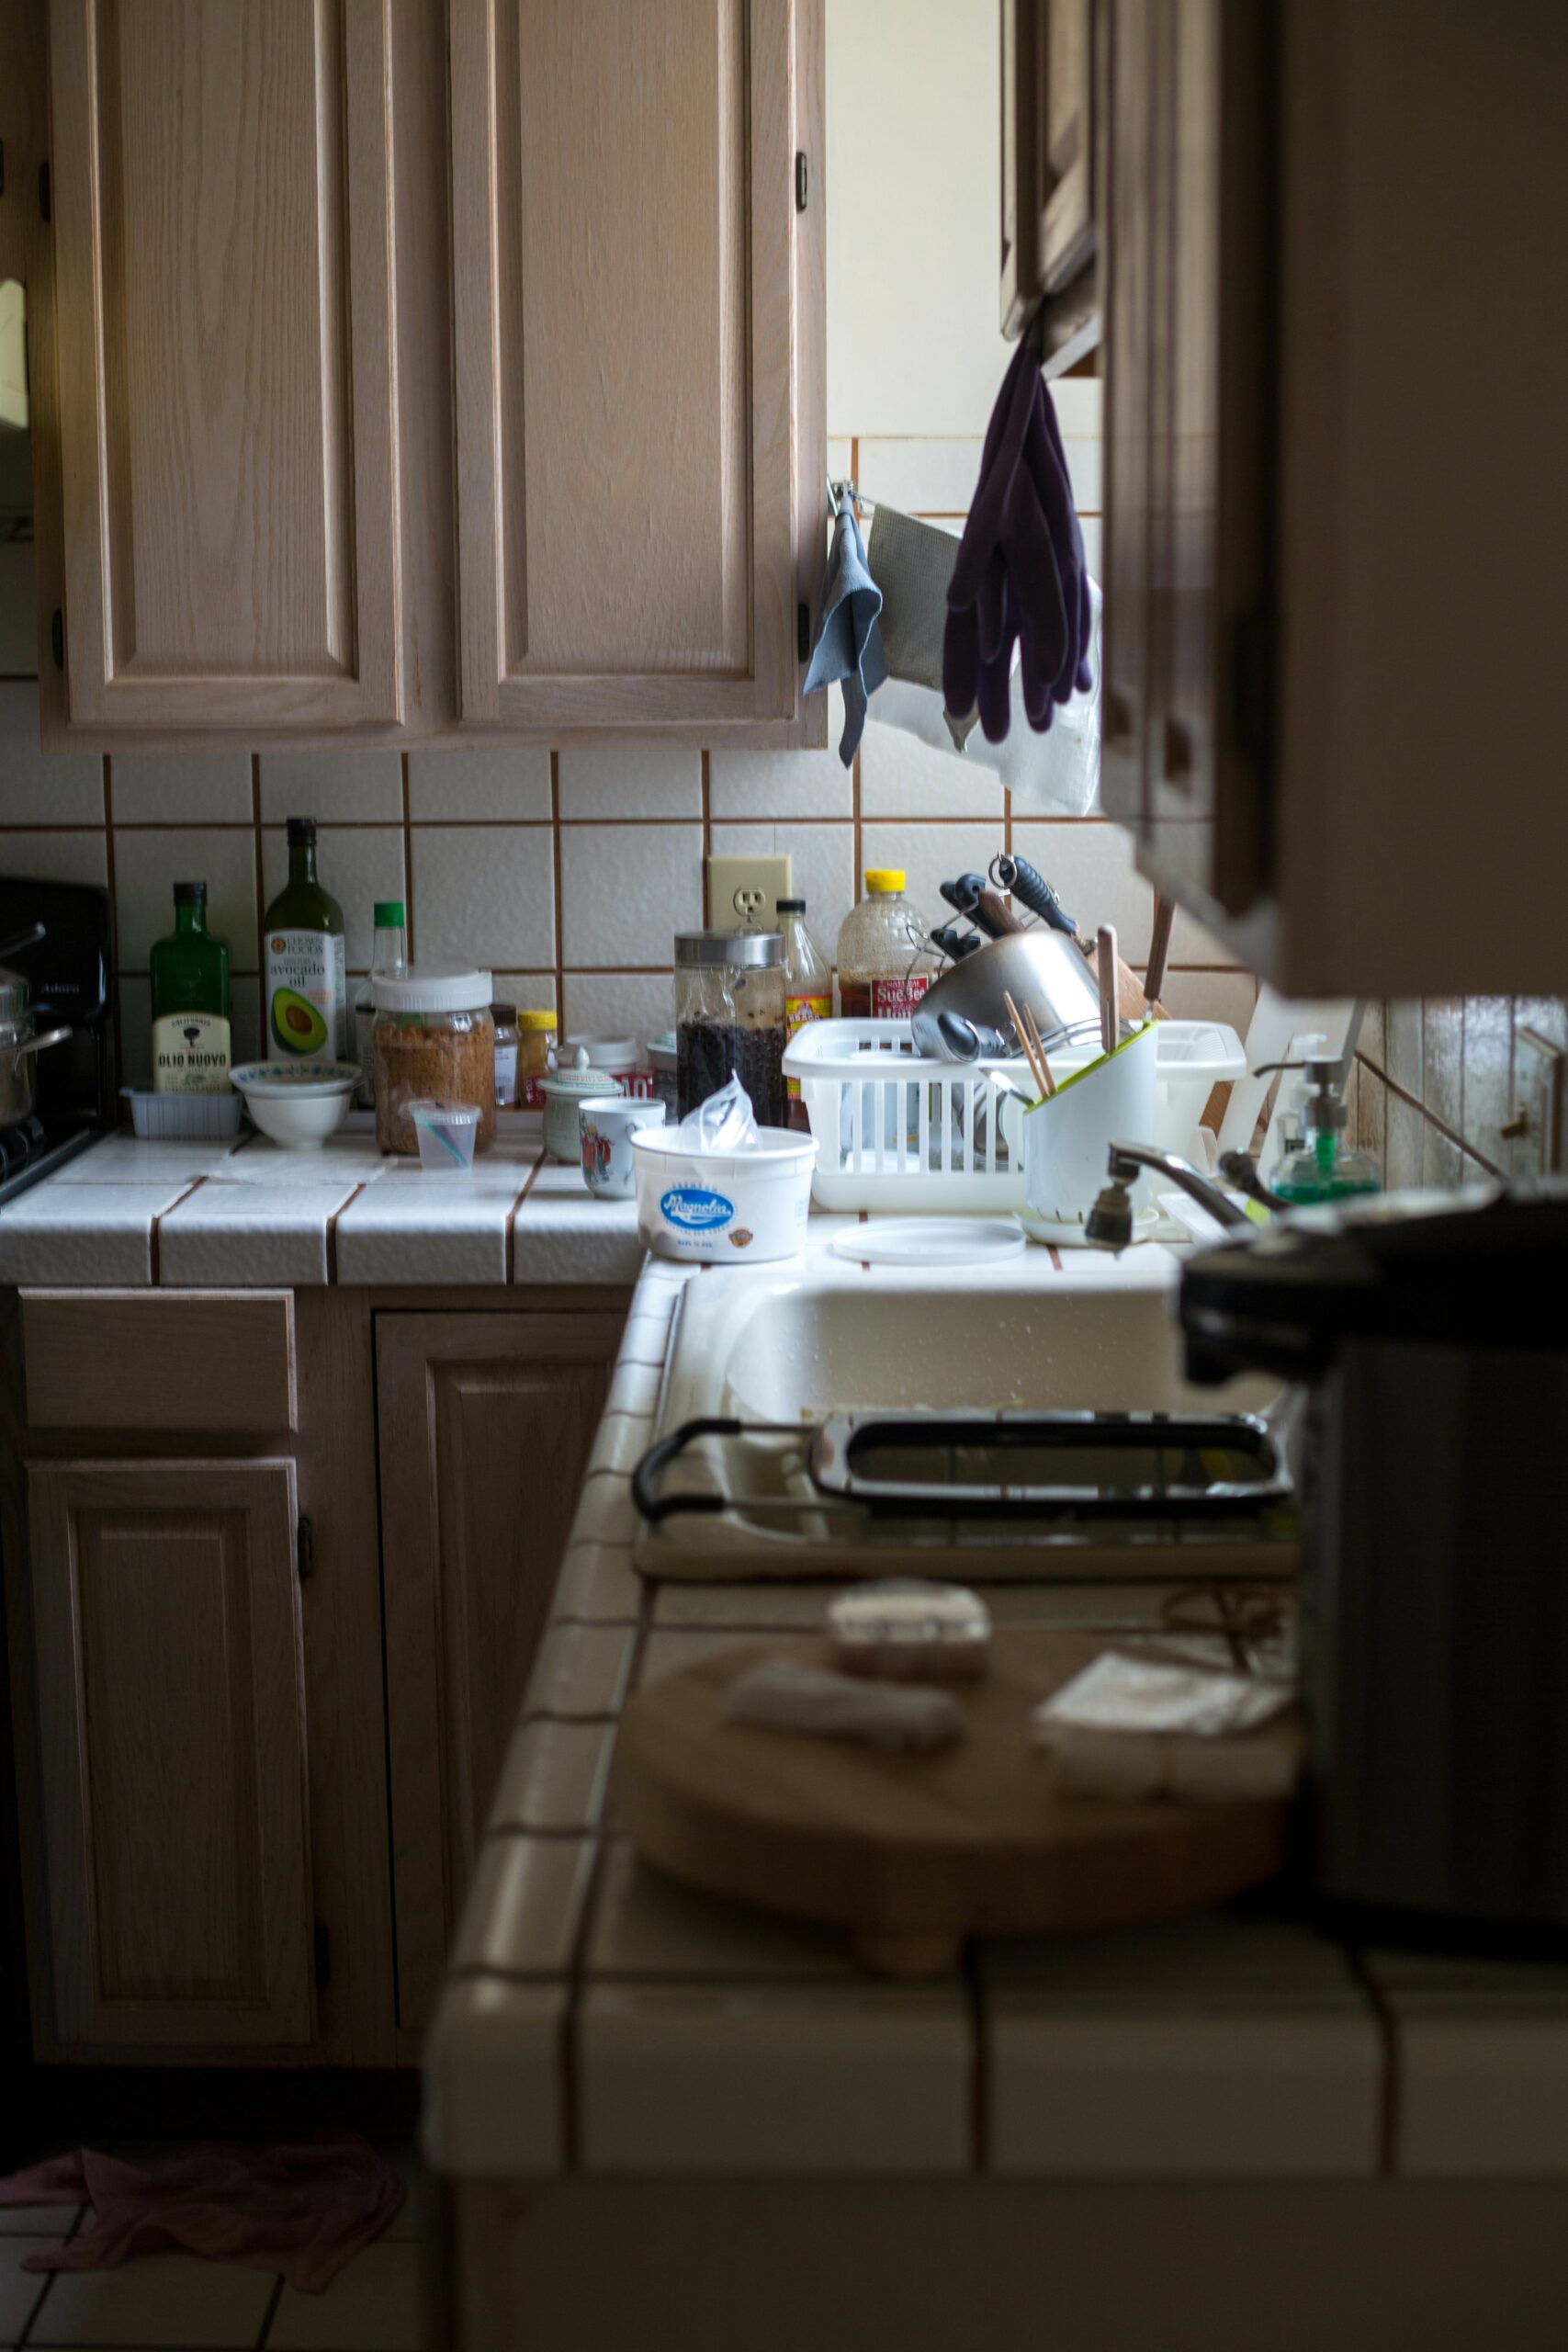 image of a cluttered kitchen, demonstrating effect of clutter on cortisol levels